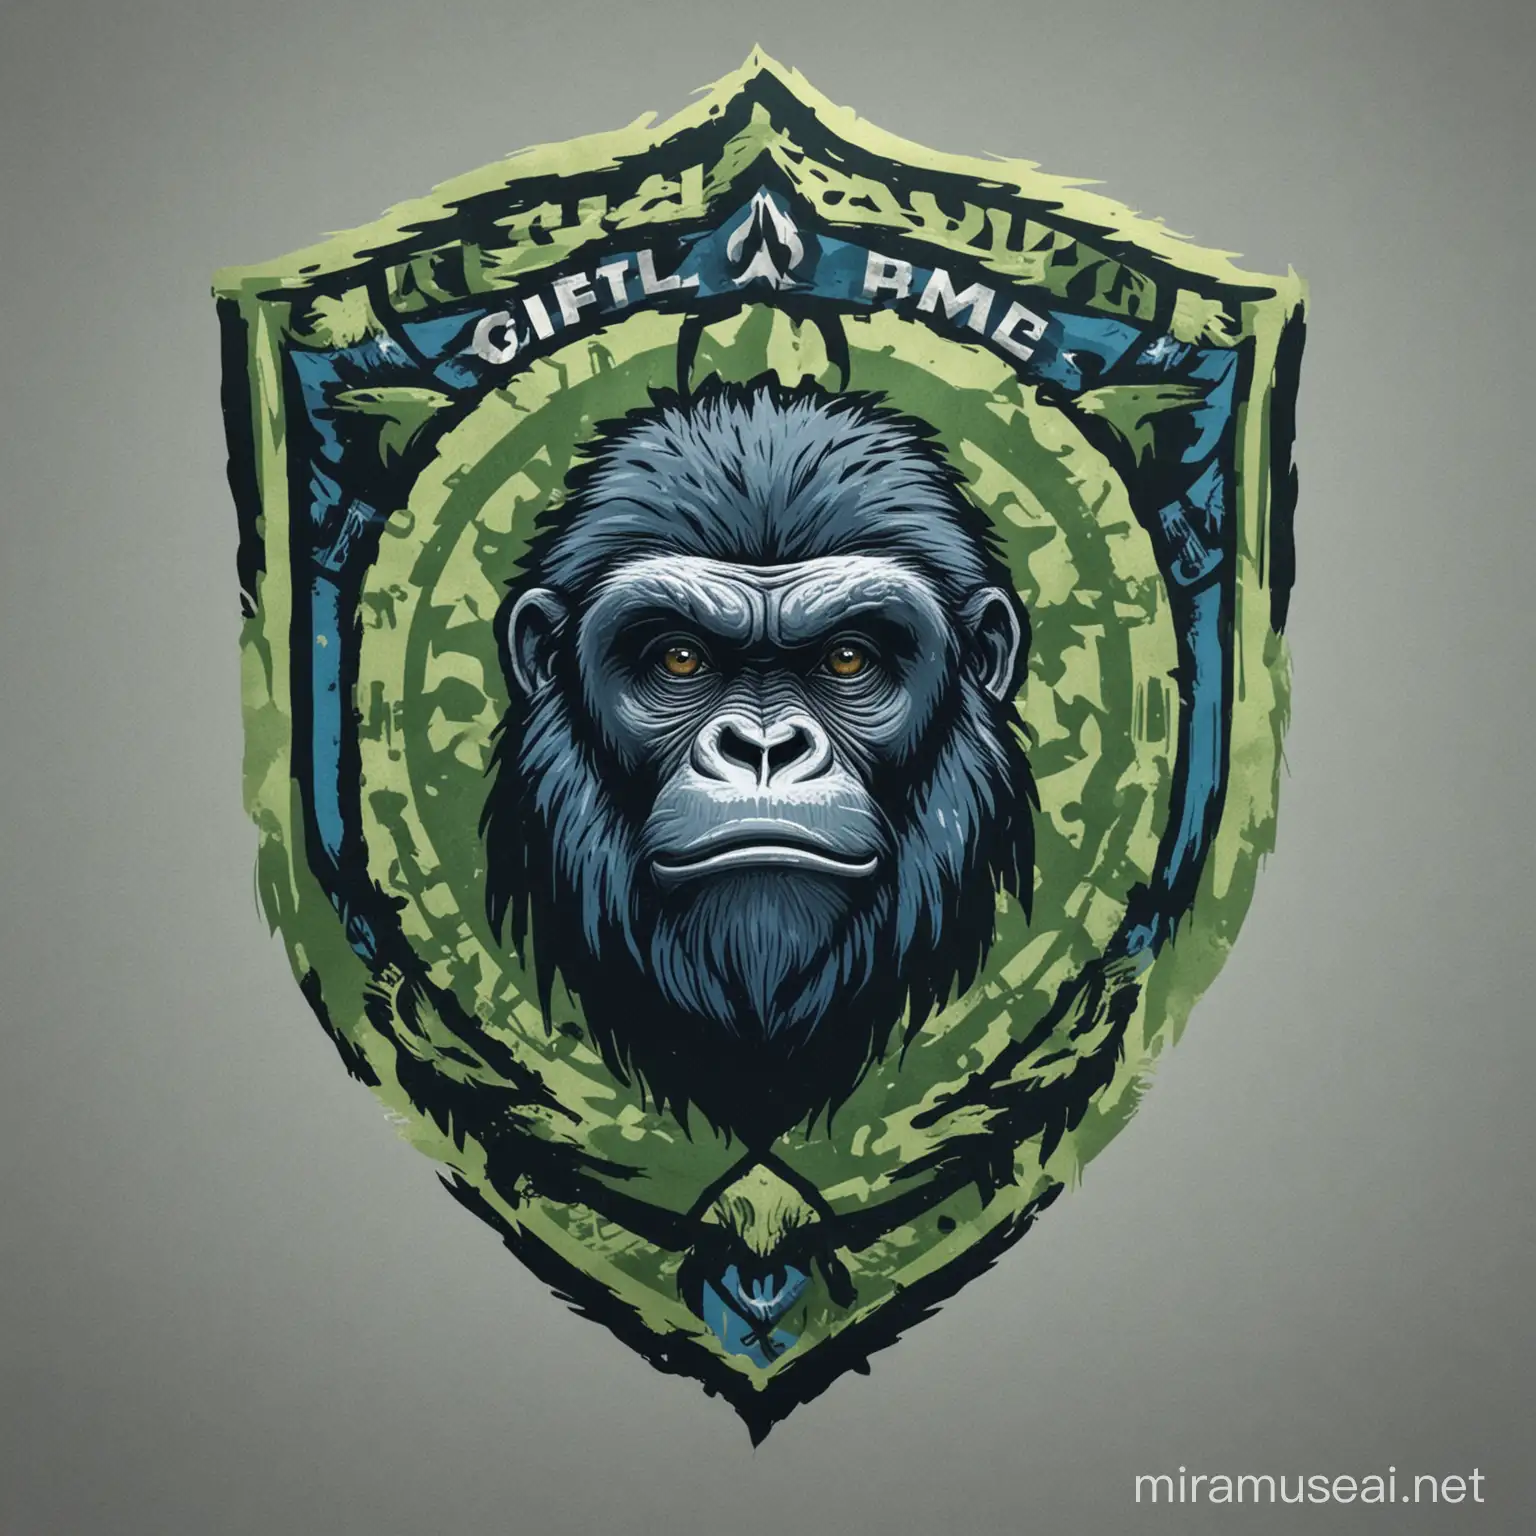 create a new flag with the colors green and blue, and with a gorilla in the middle as the crest

